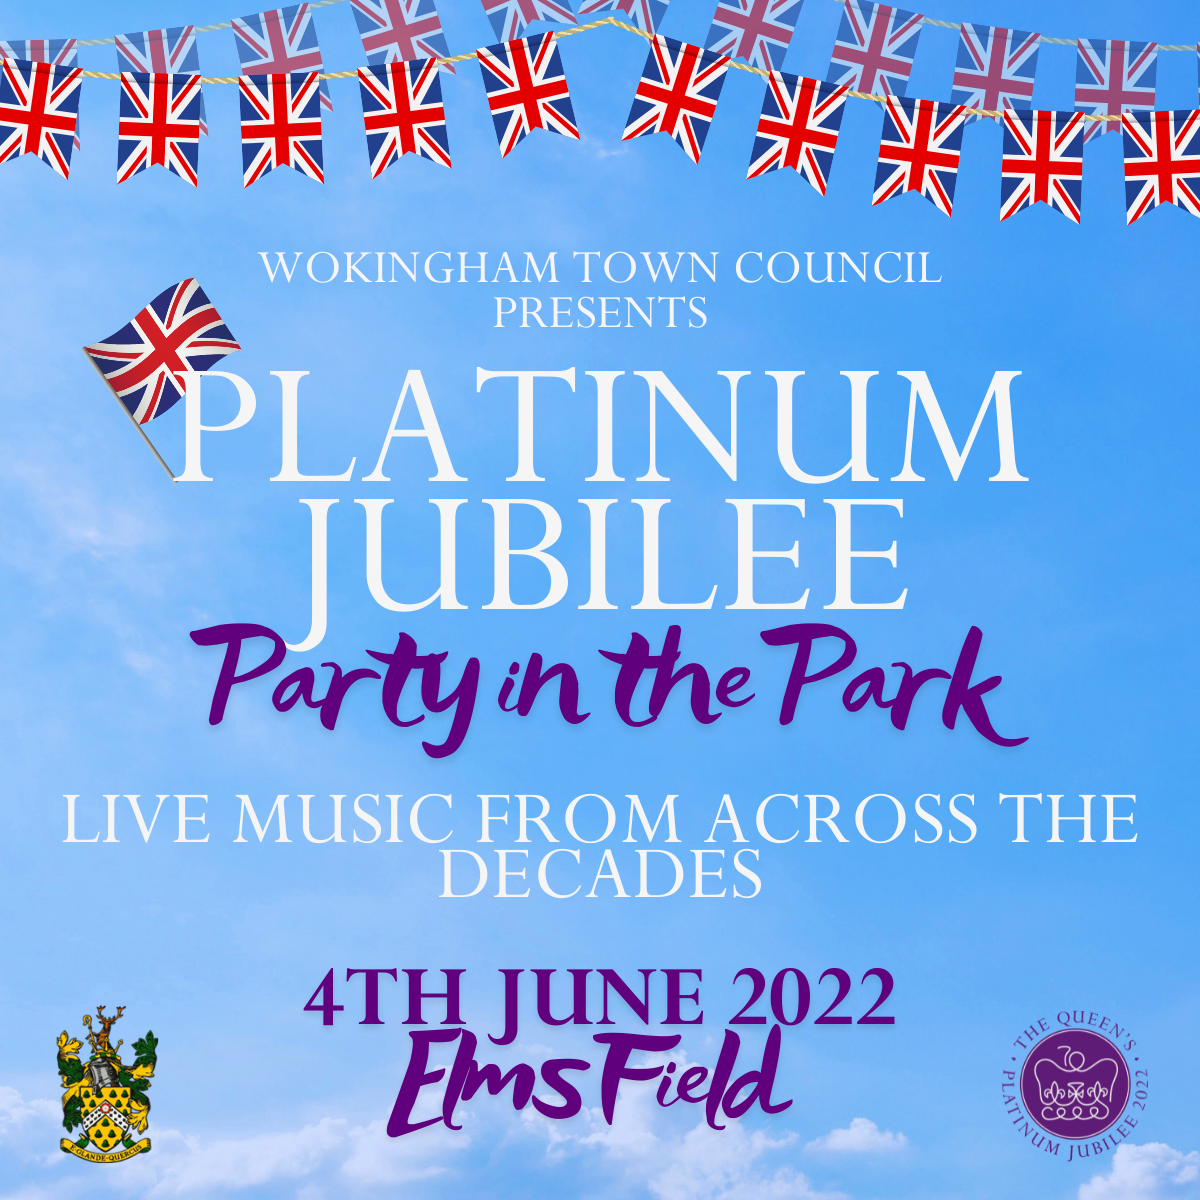 Platinum Jubilee Party In The Park